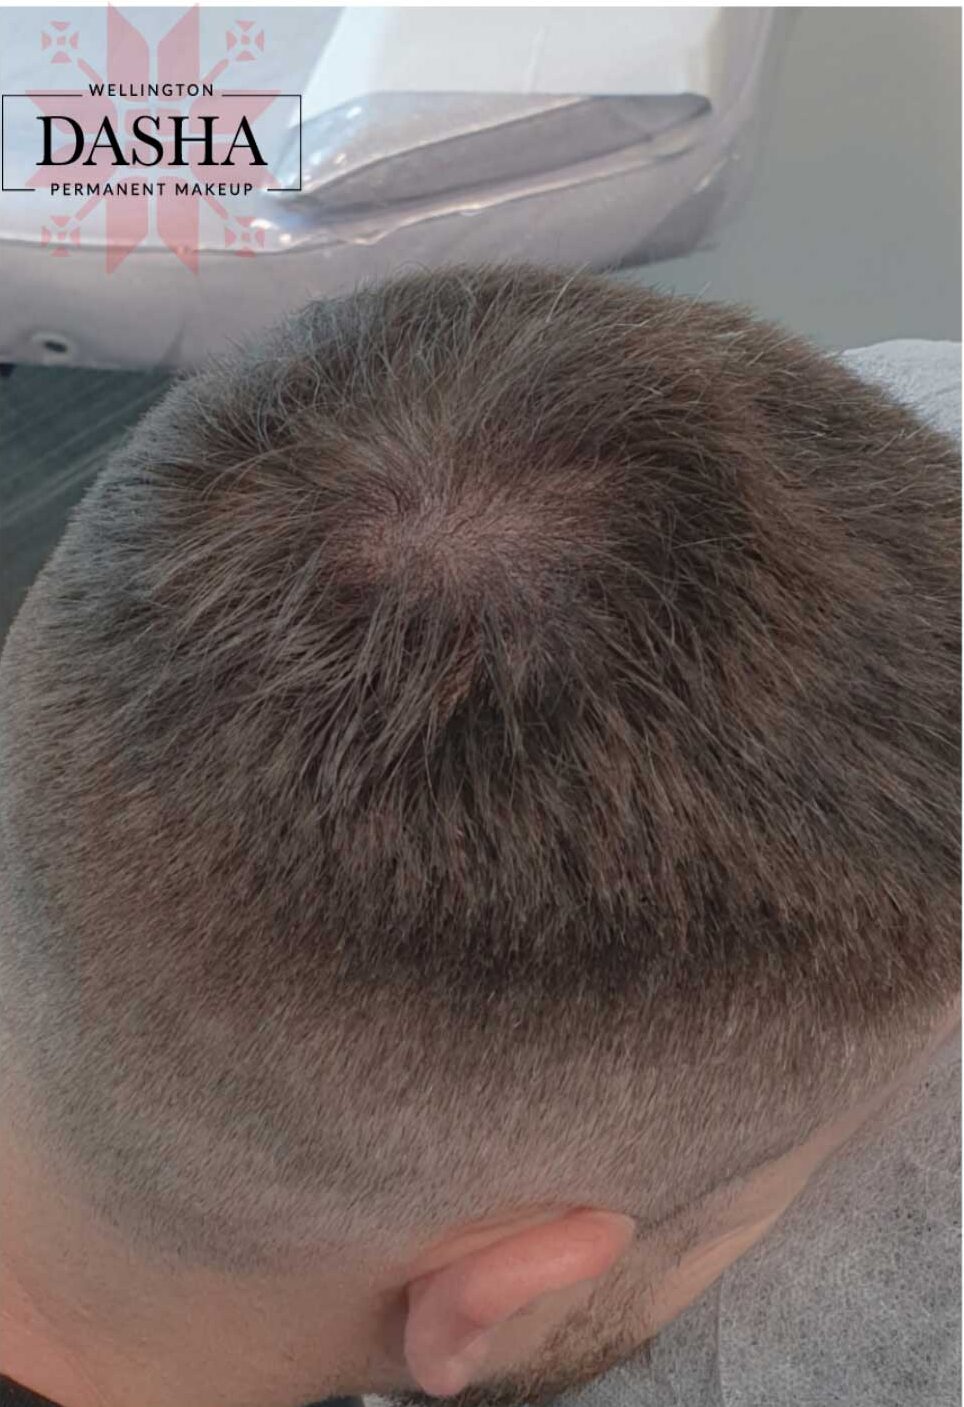 Scalp Micropigmentation. Cosmetic and Mediical Tattoo by Dasha. Permanent makeup and reconstructive tattoo, scalp micro-pigmentation in Christchurch, New Zealand